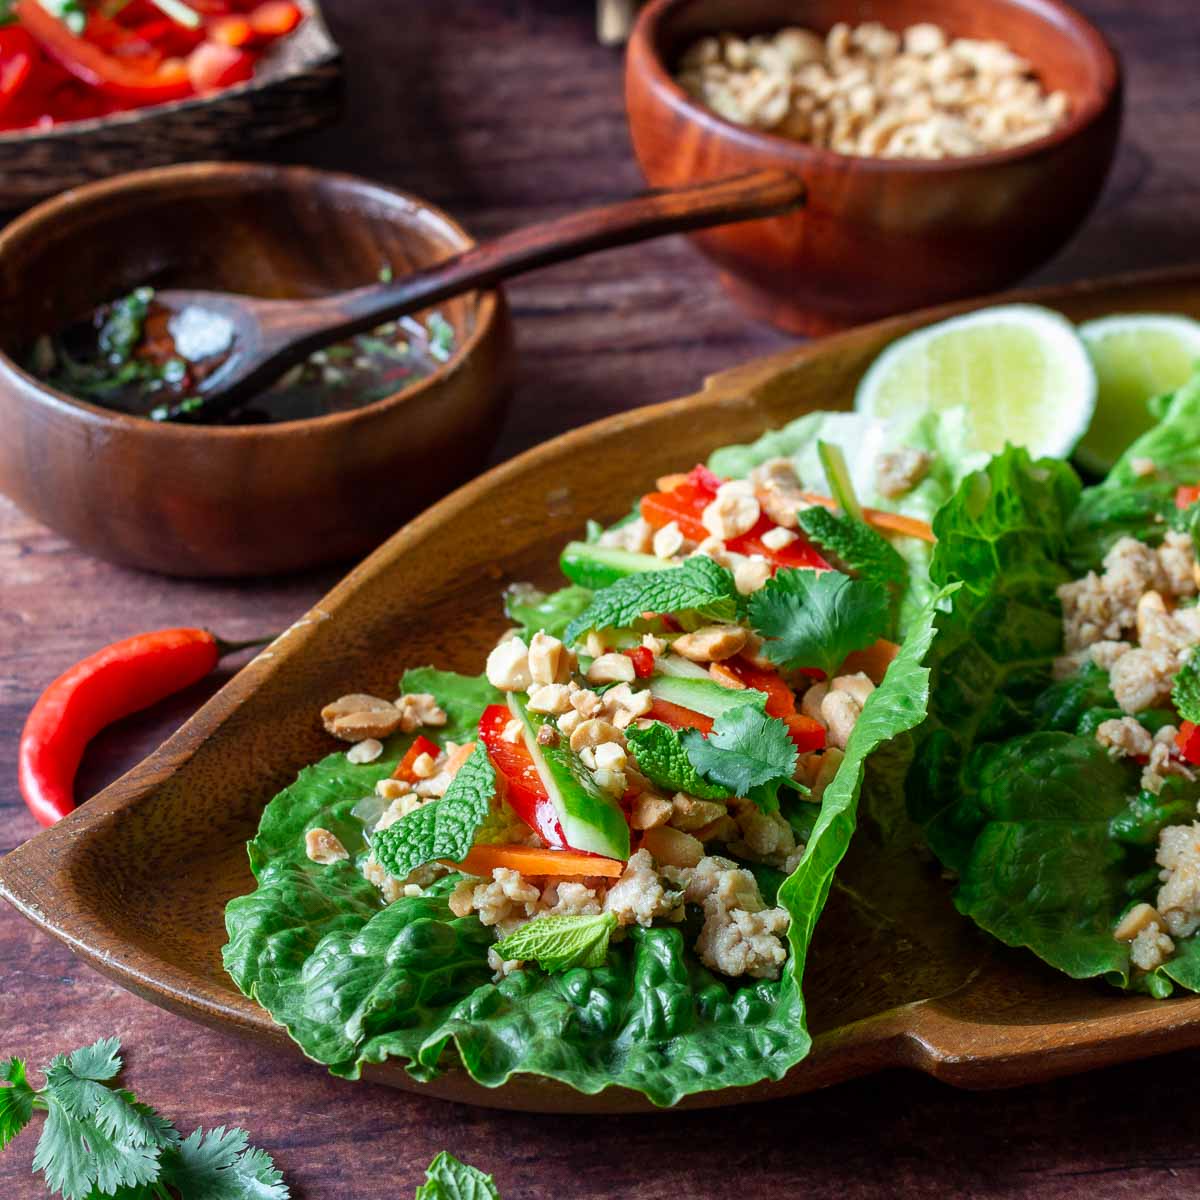 Healthy chicken lettuce wrap topped with fresh vegetables, herbs, roasted peanuts of a wooden plate with prik nam pla sauce next to it.